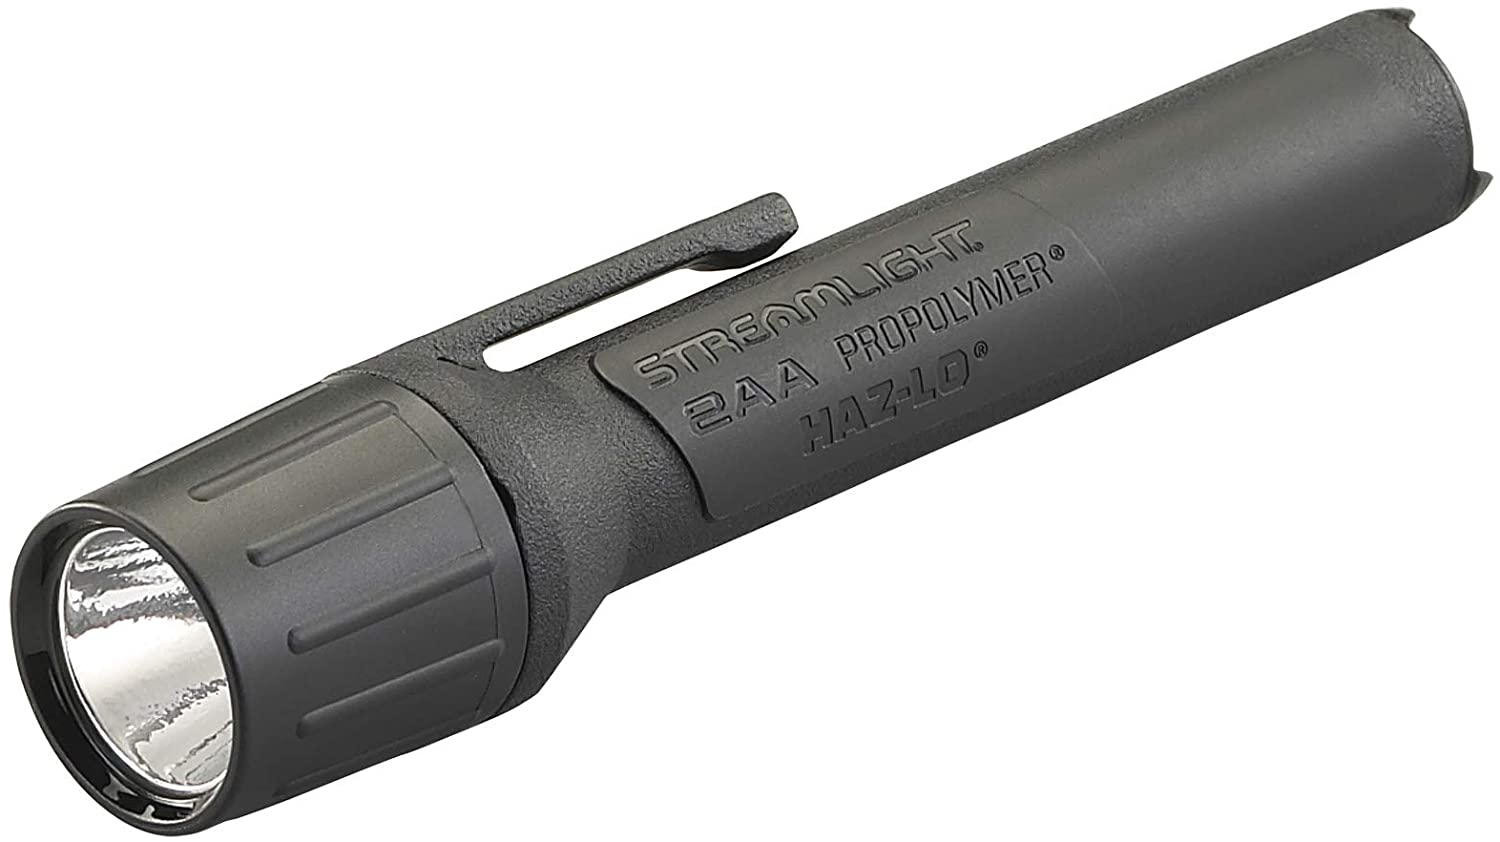 STREAMLIGHT PROPOLYMER 2AA LED WITH ALKALINE BATTERIES, BLACK COLOUR